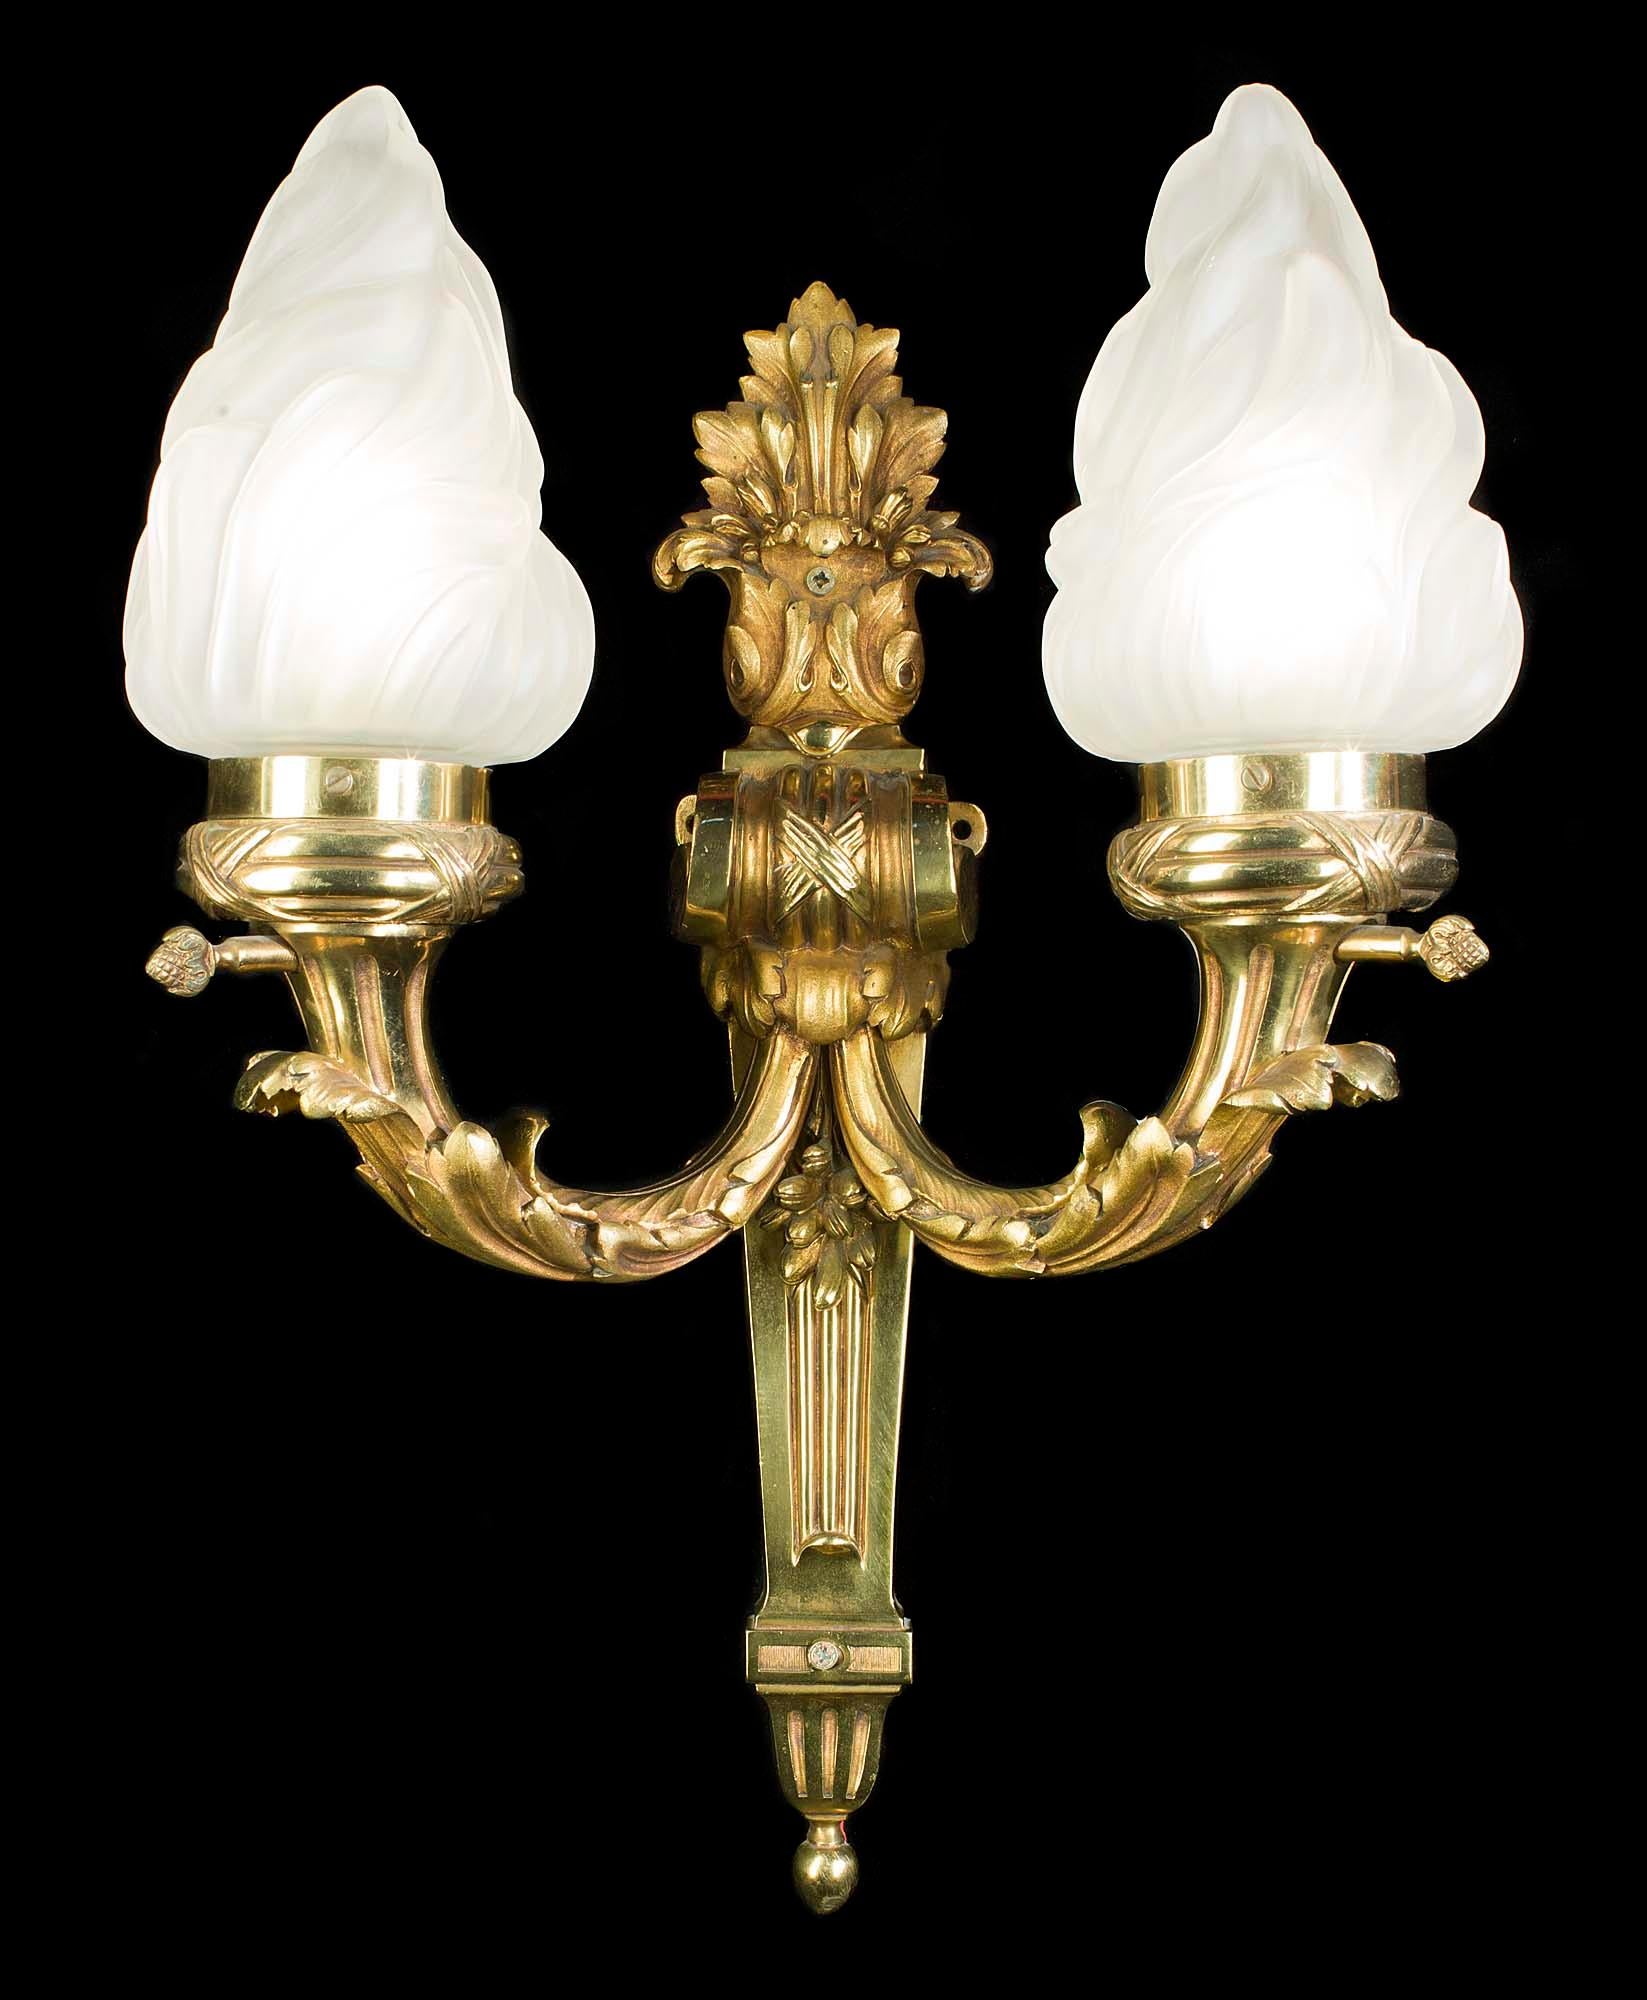 A large pair of brass Victorian antique wall lights in the Baroque style with flambeau glass shades the light controls with pineapple tipped finials. Former gasoliers converted to electricity. English, late 19th century.